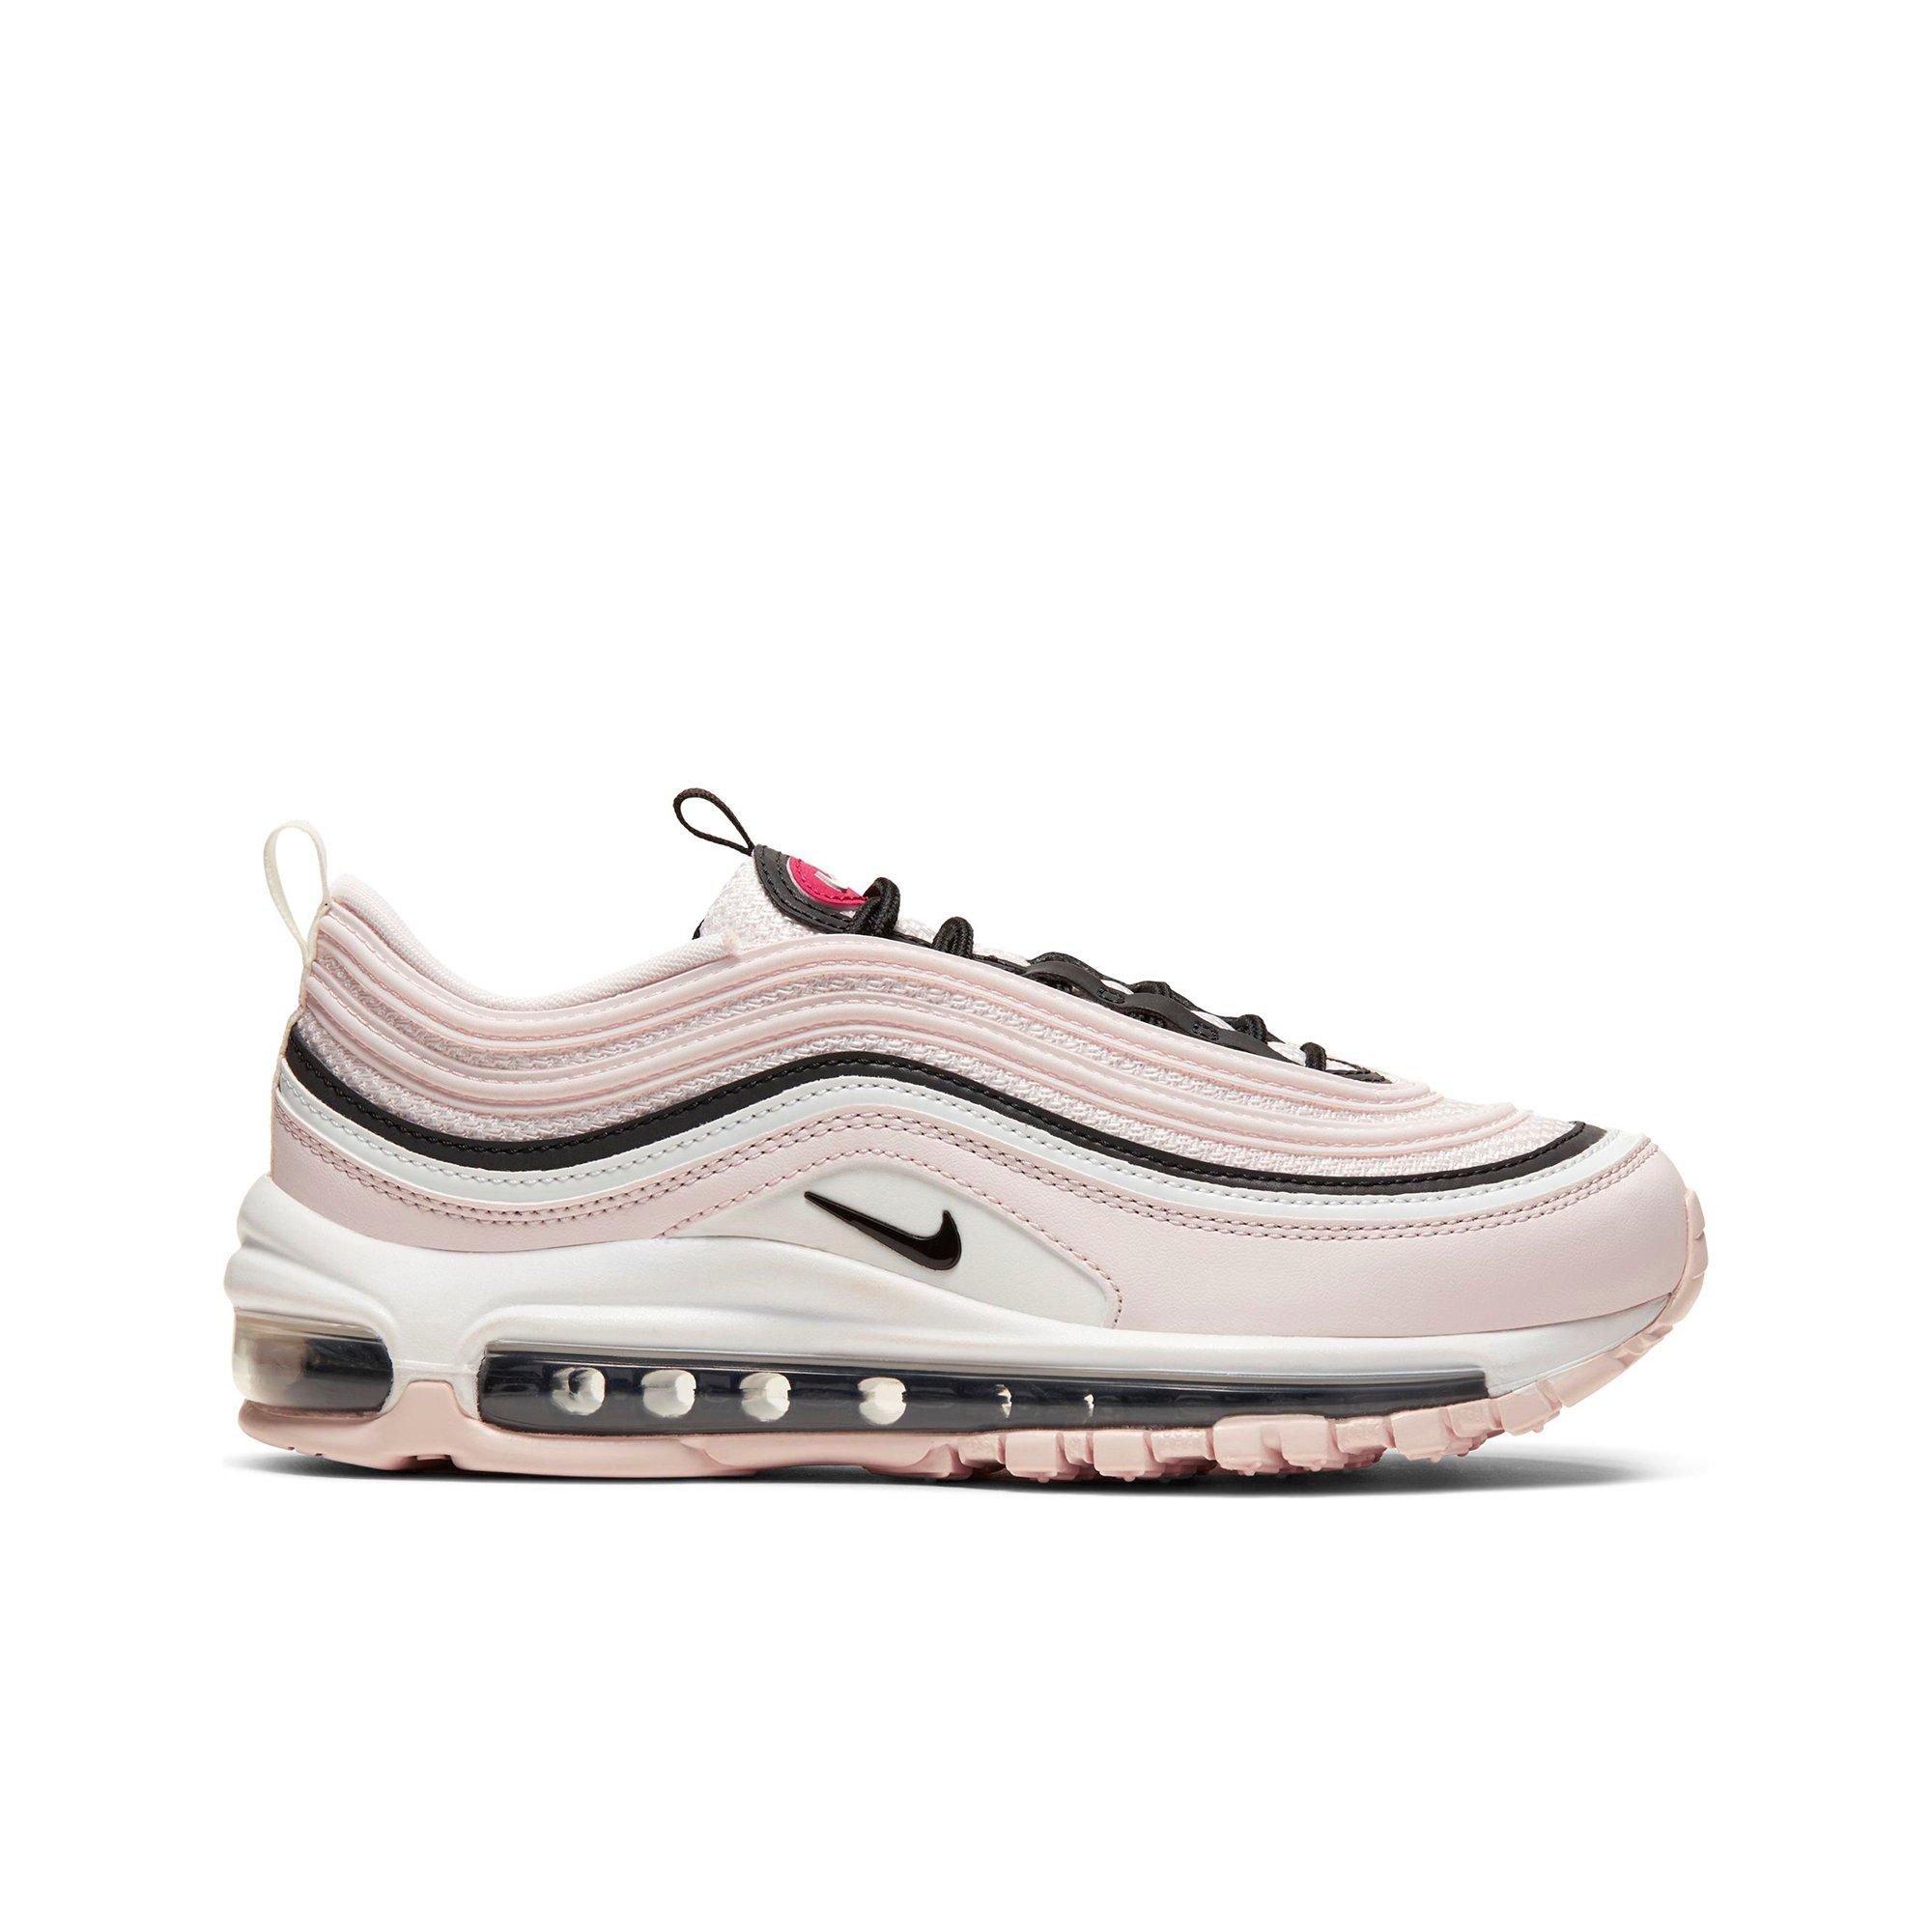 pink and white 97